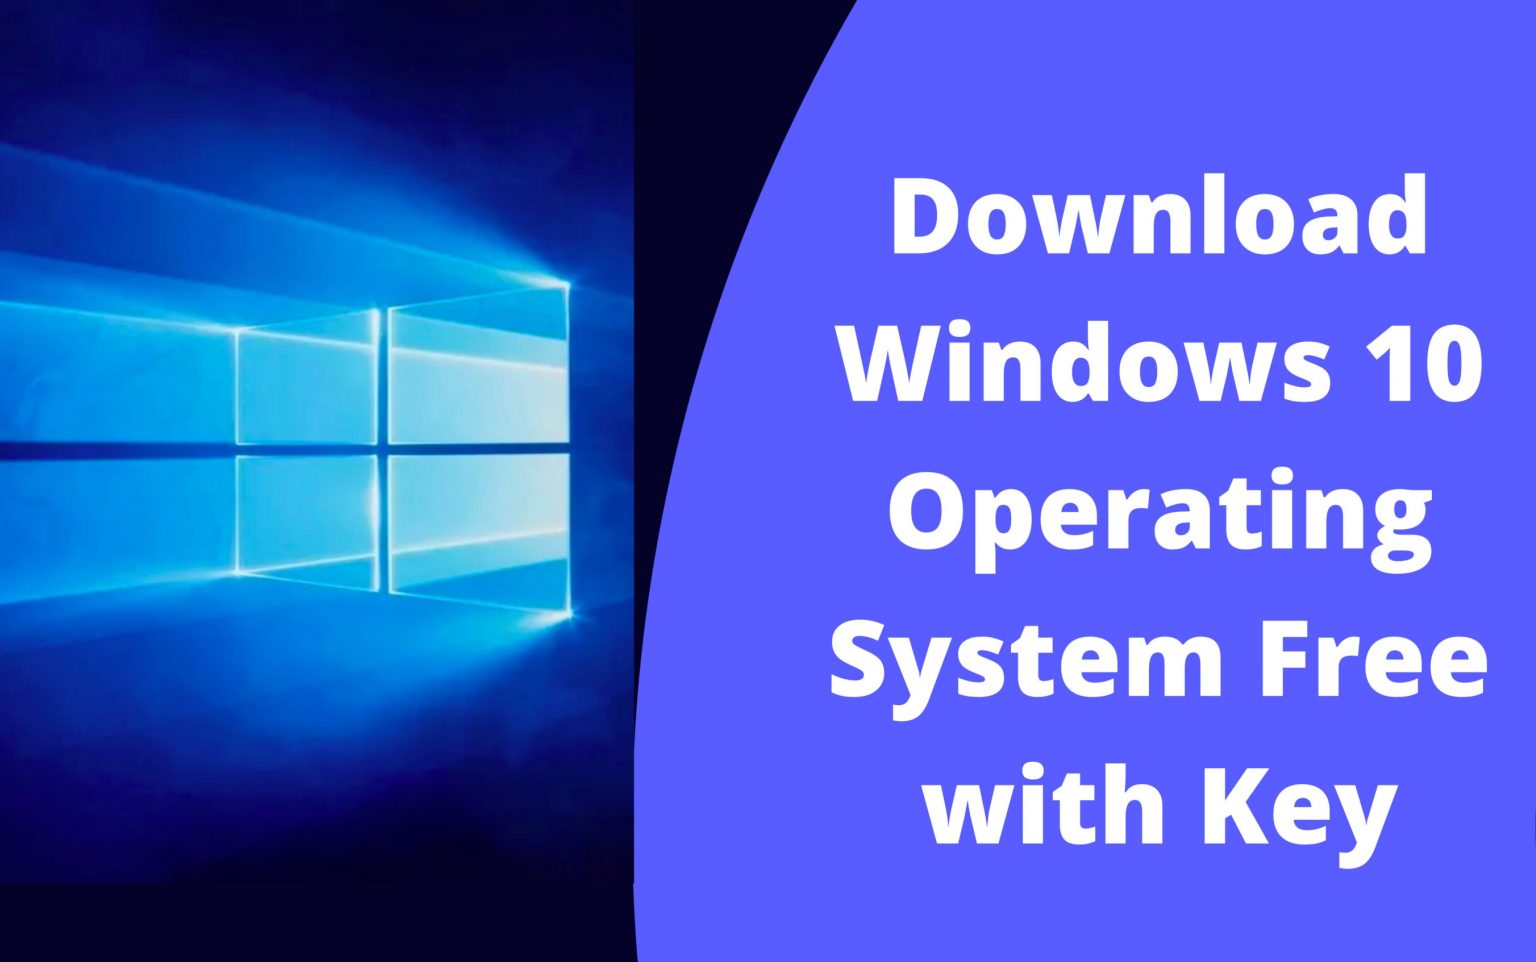 Windows 10 Free Download Full Version with Key complete guide